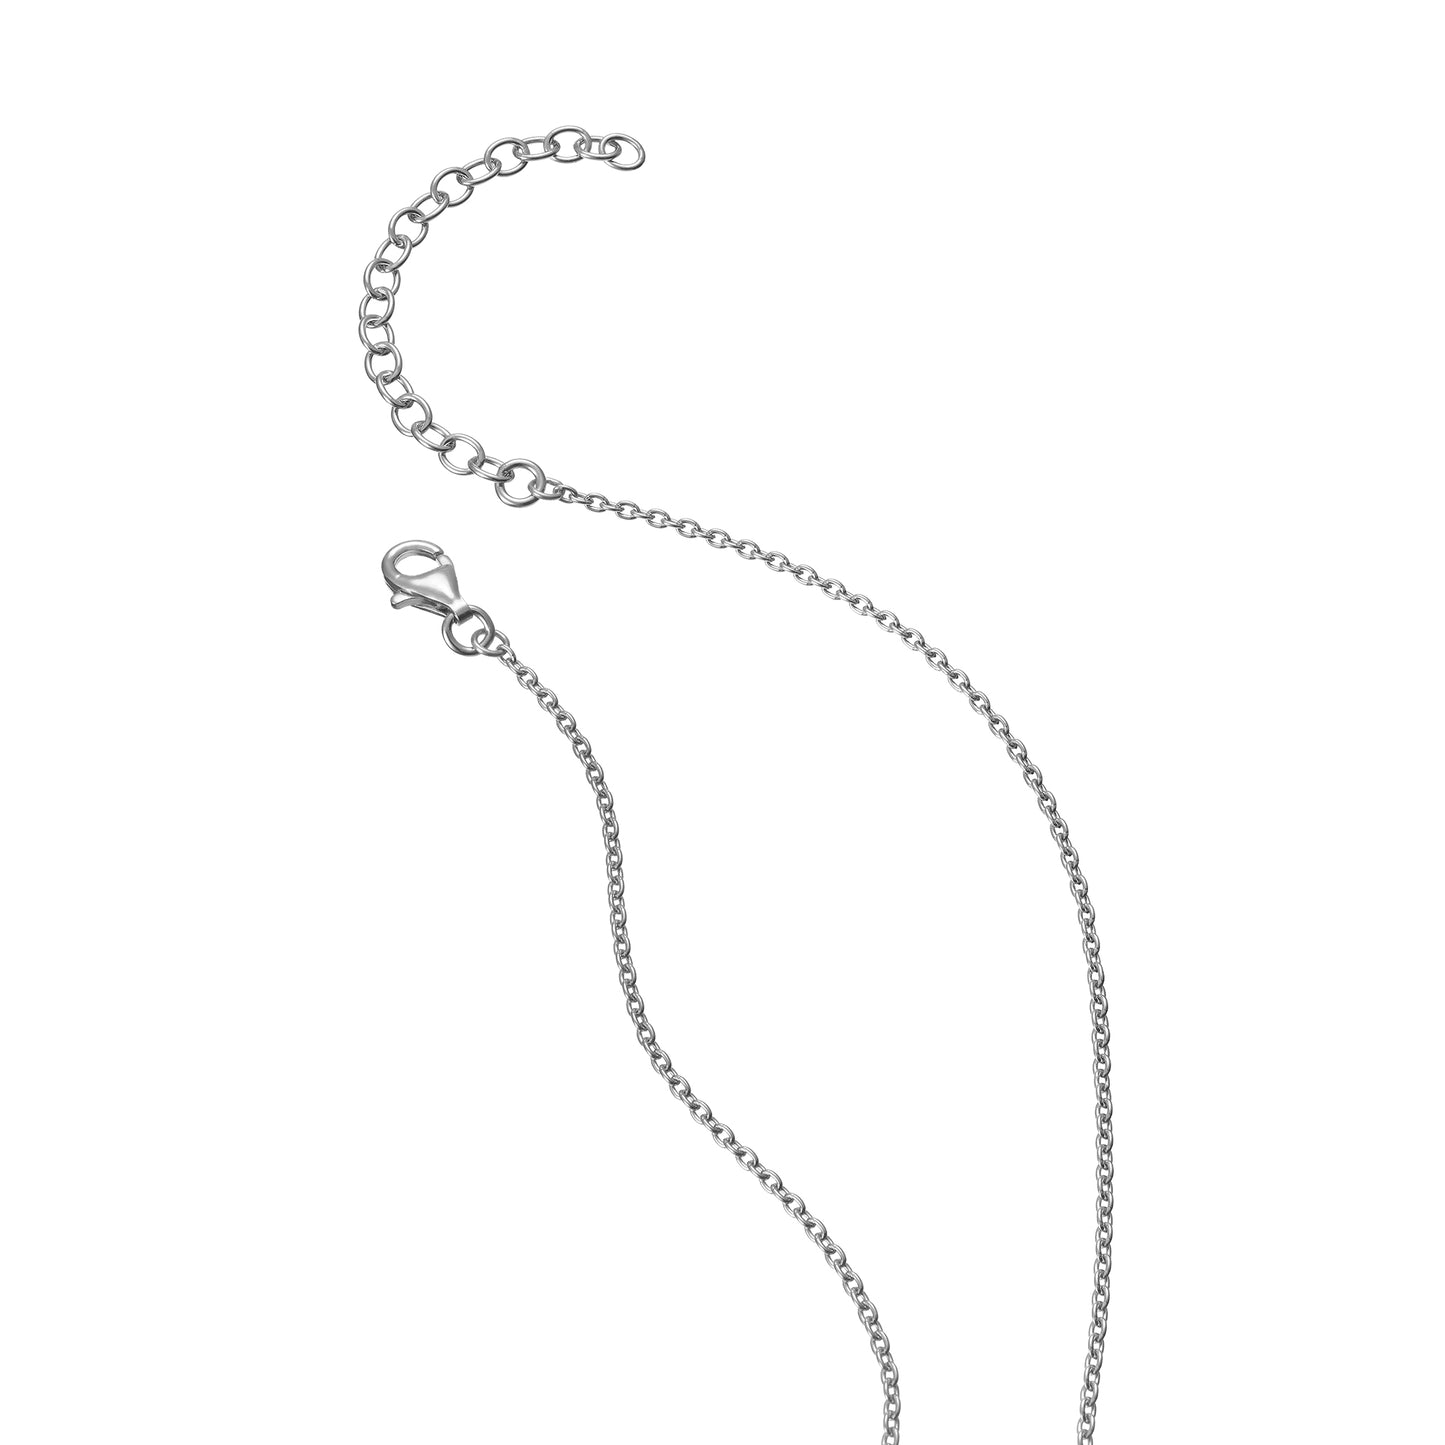 Silver necklace with adjustable clasp closure